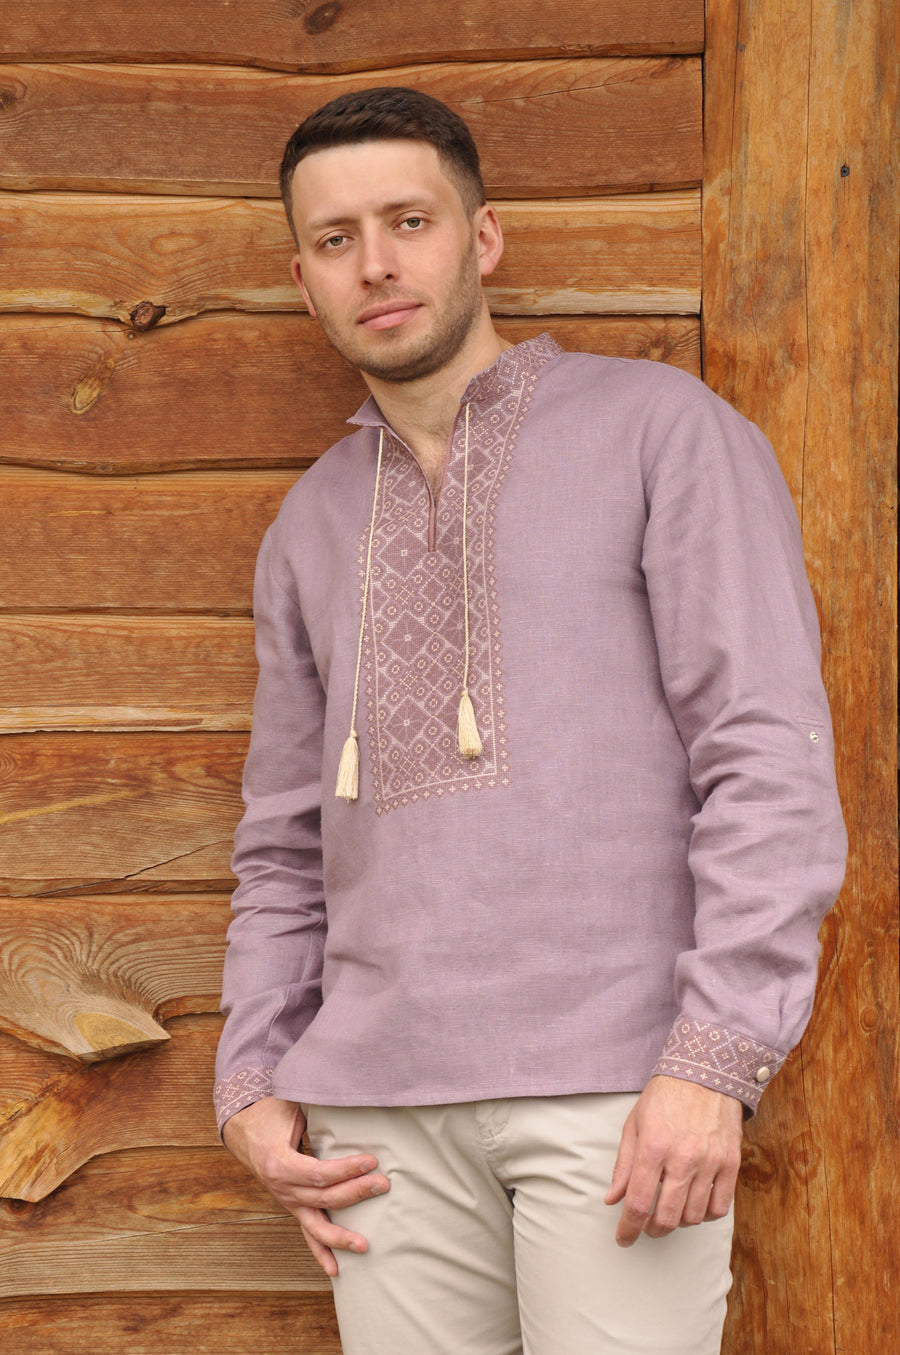 Embroidered men's shirt with slavic ornaments